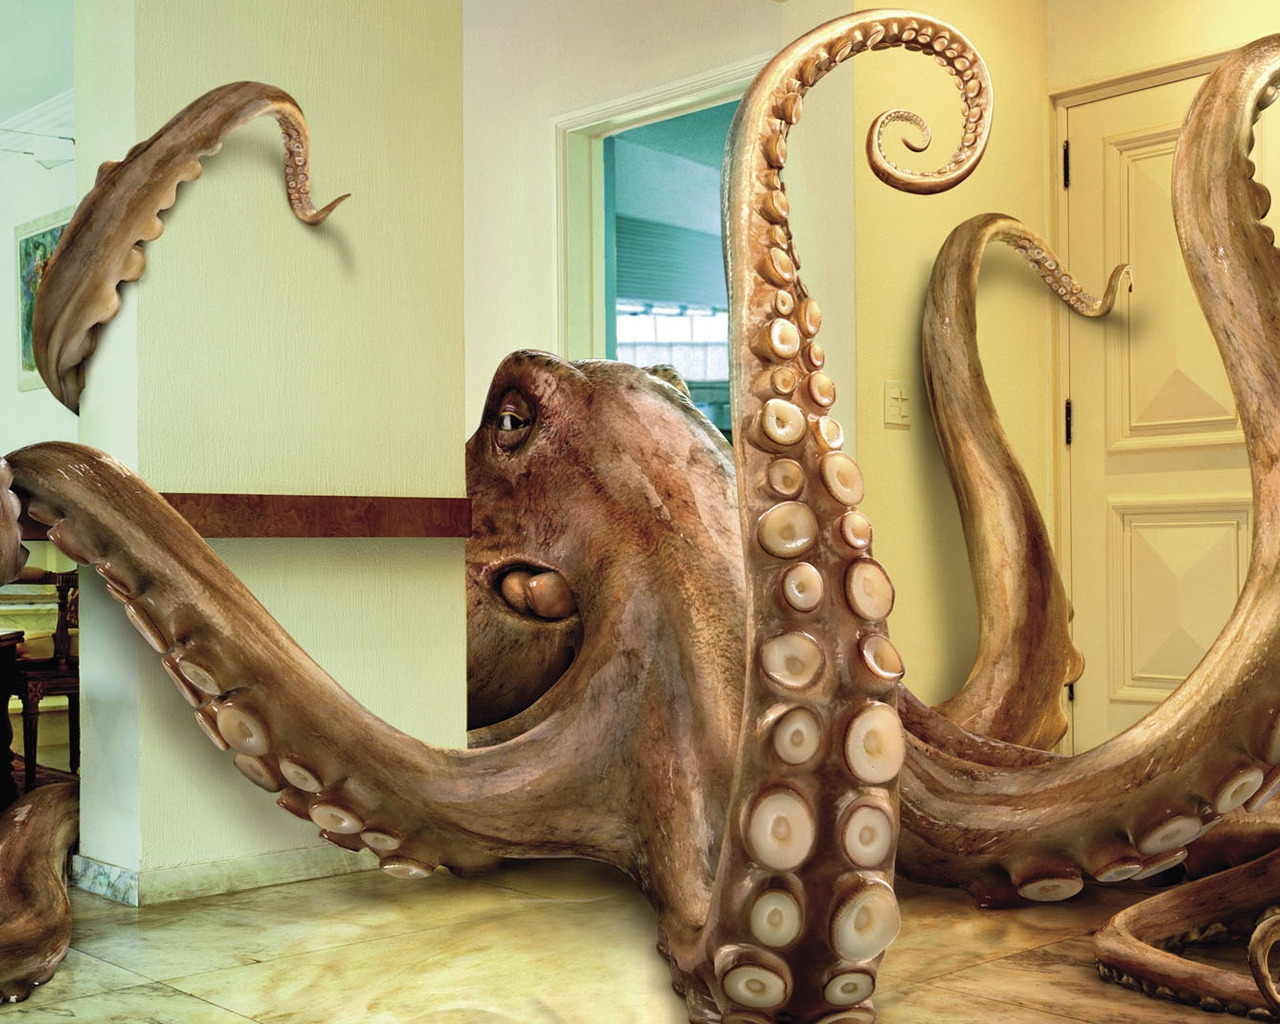 Octopus for 1280 x 1024 resolution